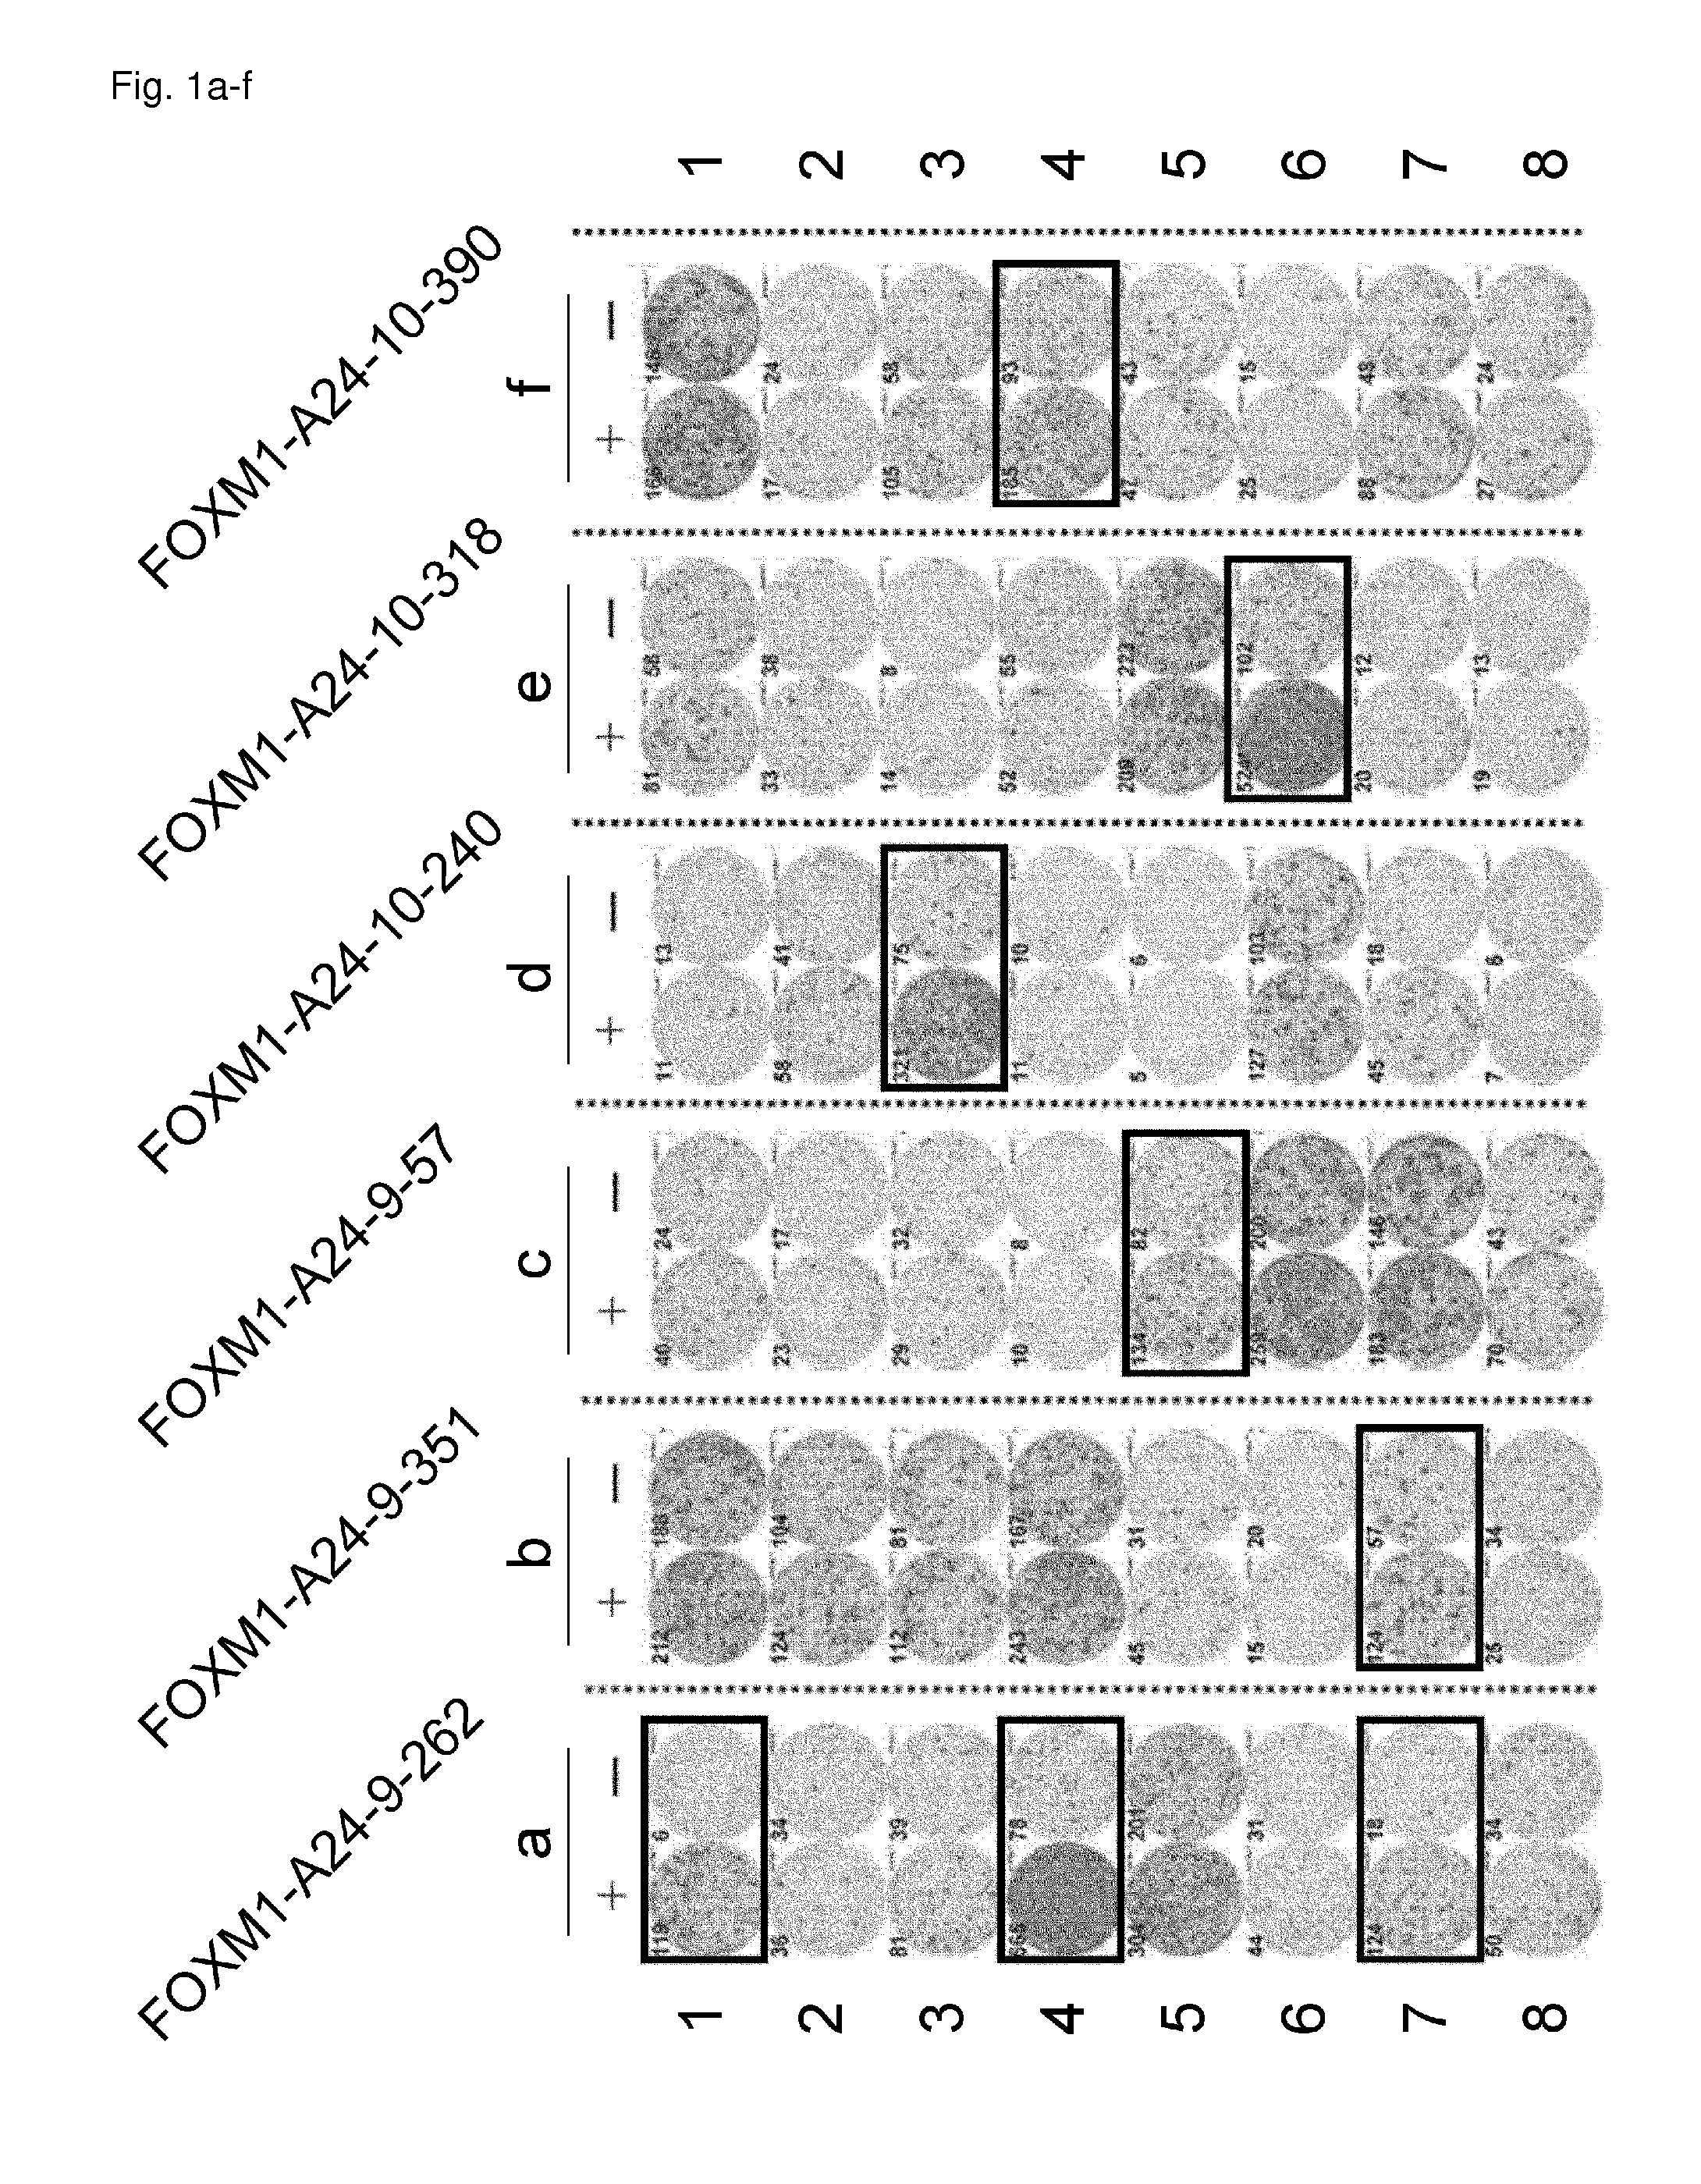 FOXM1 peptides and immunogenic compositions containing them